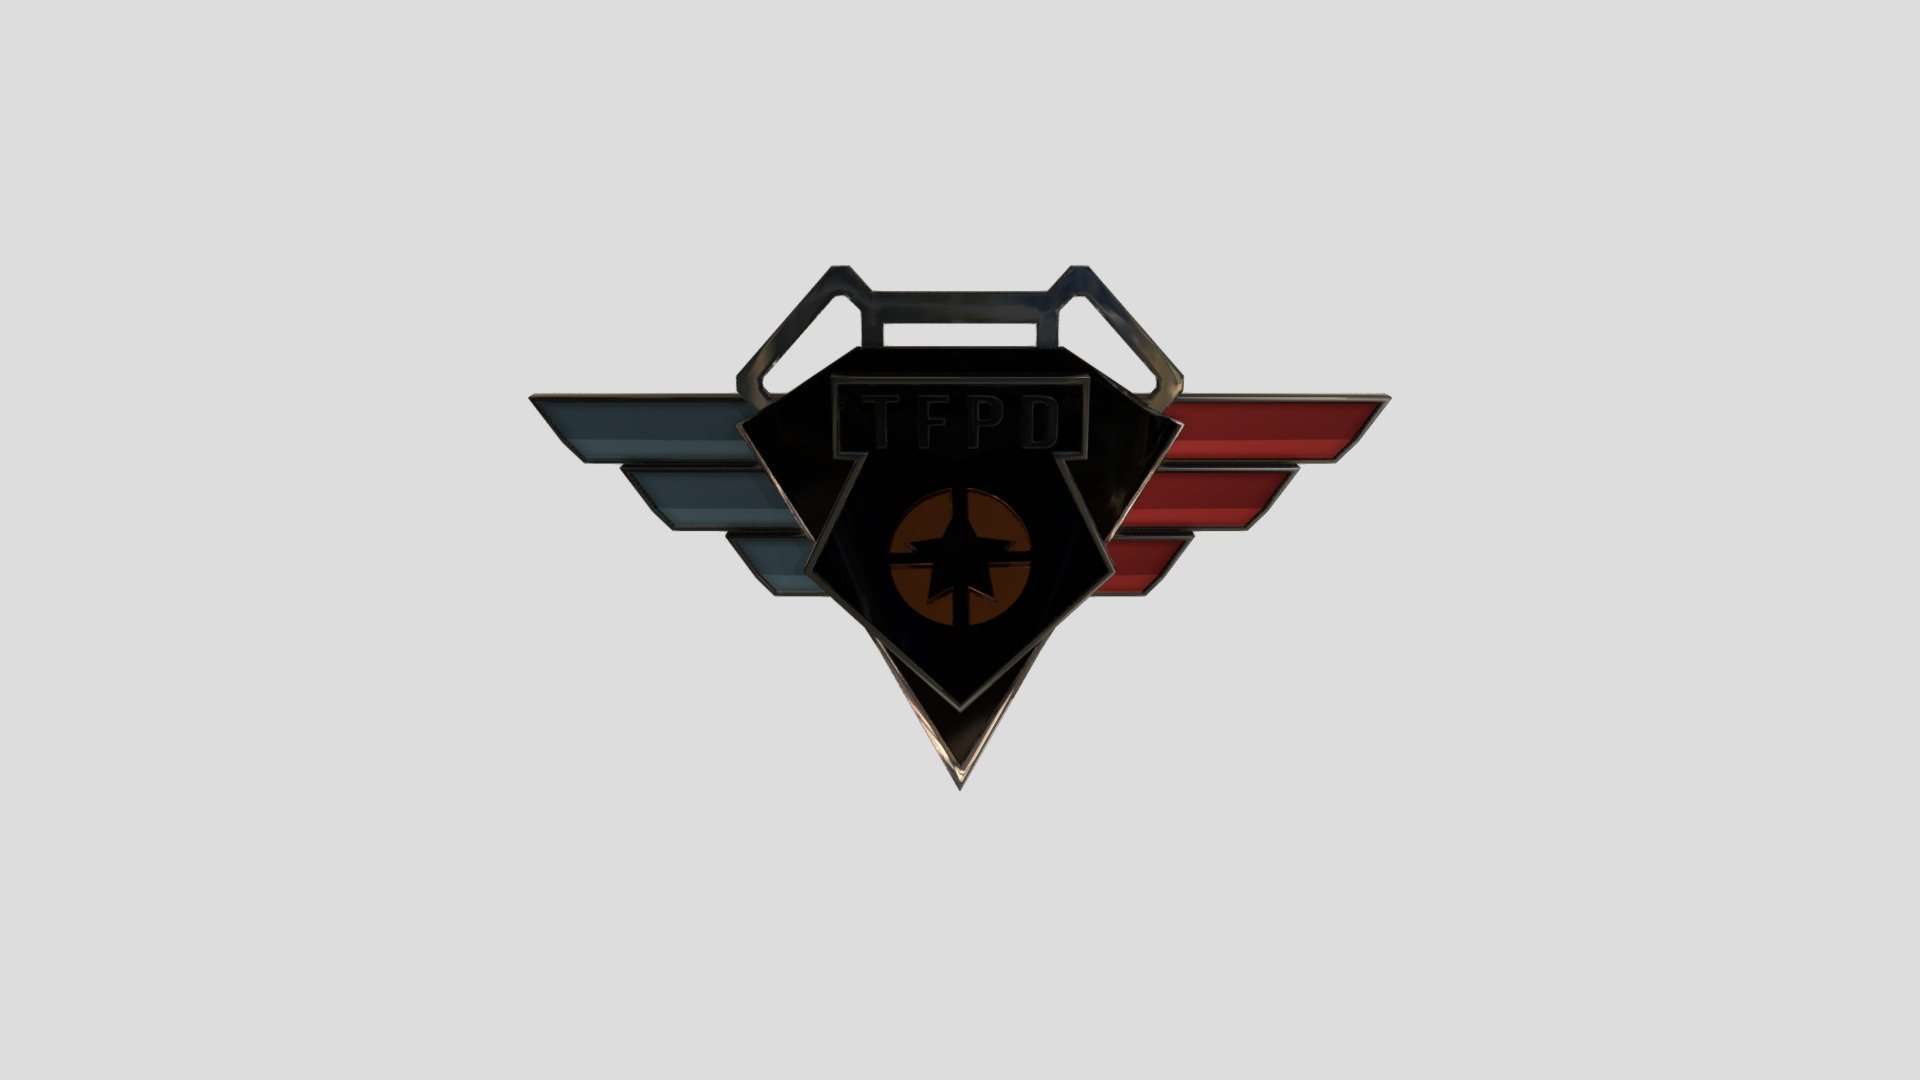 A badge model I made for a TF2 Discord server. 

TFPD (also known as TF2 Swat) is a group made to fight against the TF2 bot invasion that is happening currently, it is based on the original icon of the server which is now replaced with the vector art drawing of this model 3d model